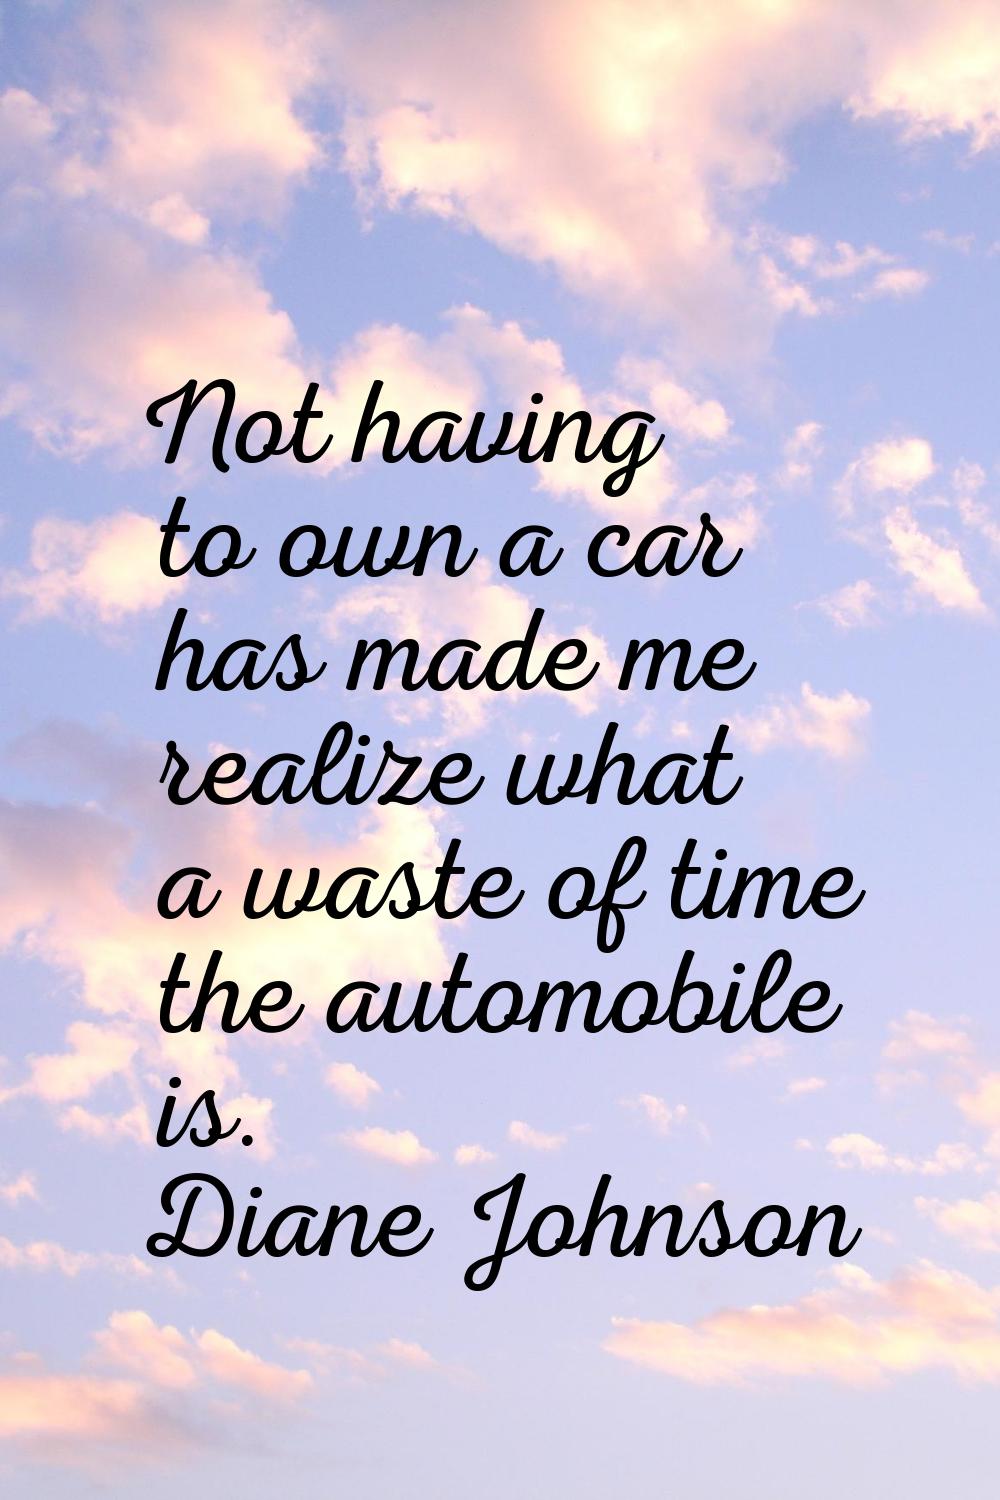 Not having to own a car has made me realize what a waste of time the automobile is.